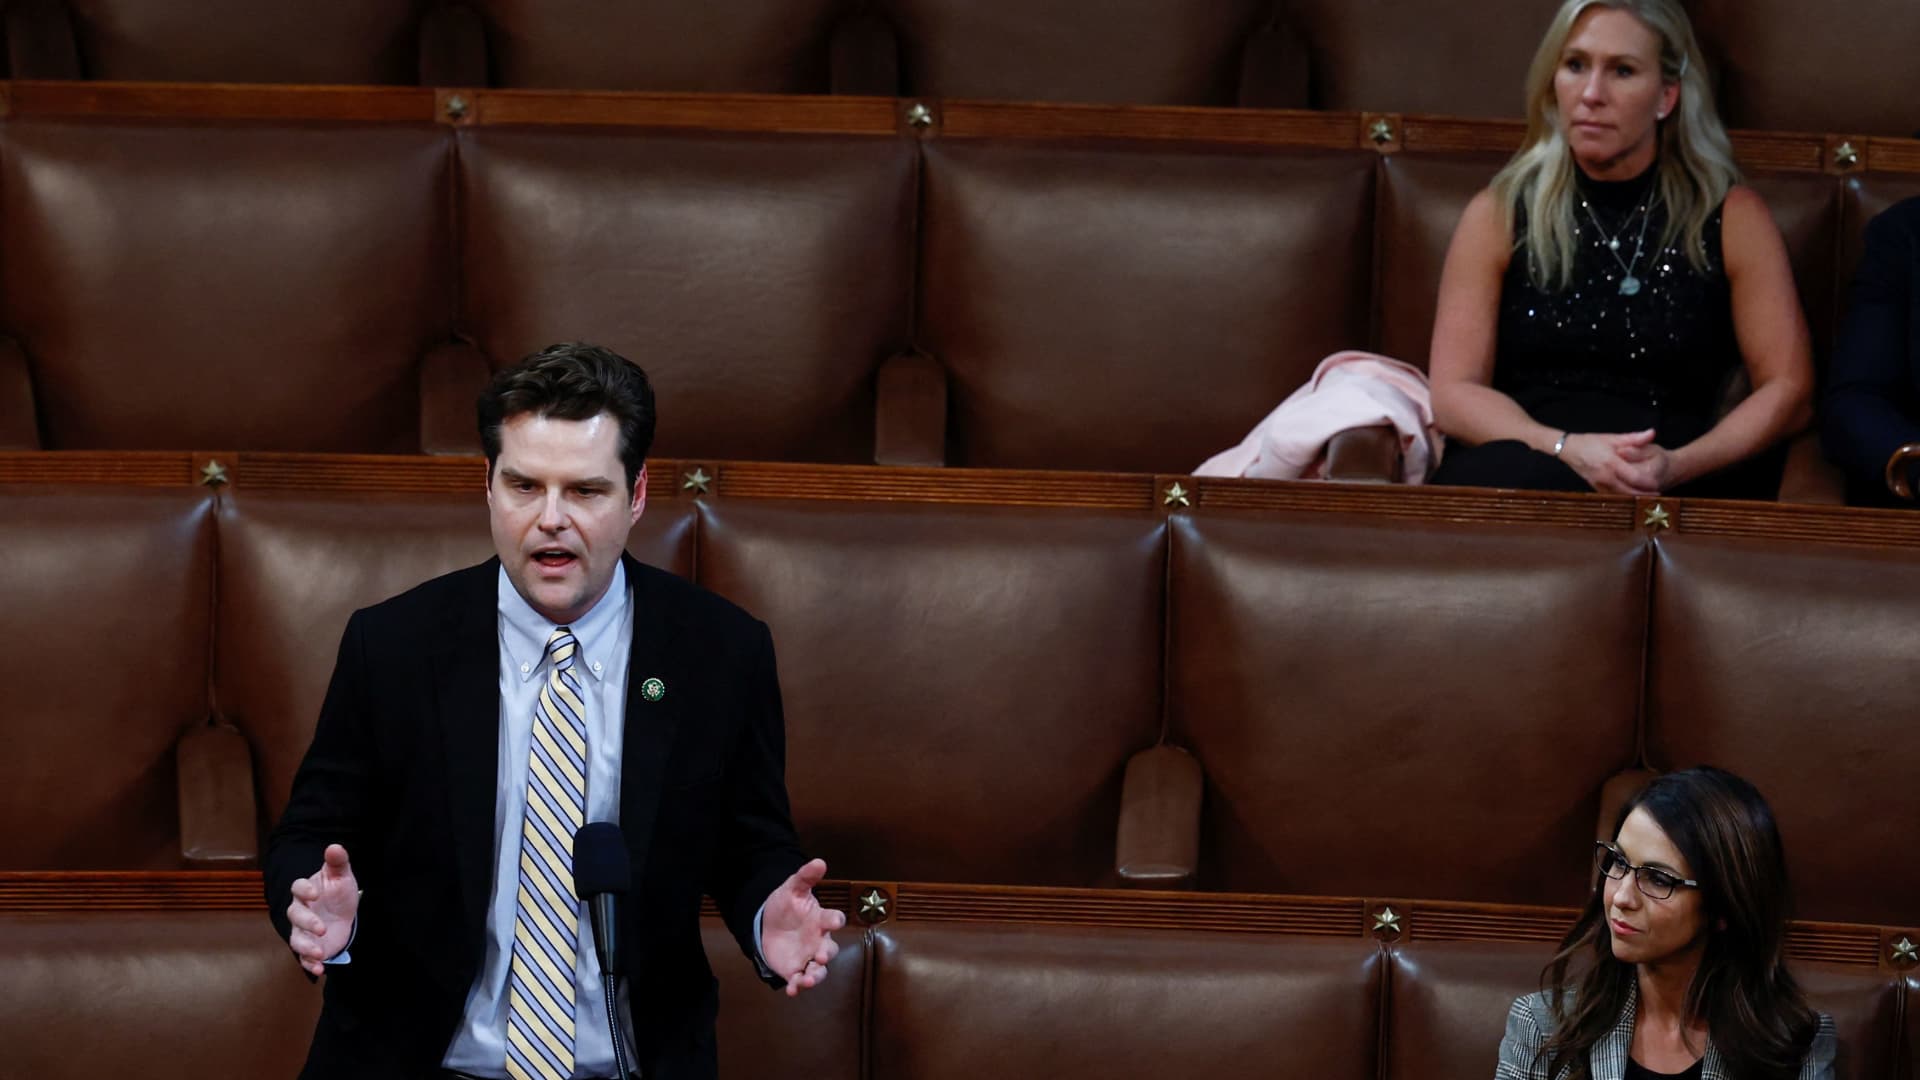 U.S. Rep. Matt Gaetz (R-FL) nominates former President Donald Trump for Speaker of the House as Rep. Marjorie Taylor Greene (R-GA) and Rep. Lauren Boebert (R-CO) watch inside the House Chamber on the third day of the 118th Congress at the U.S. Capitol in Washington, U.S., January 5, 2023. 